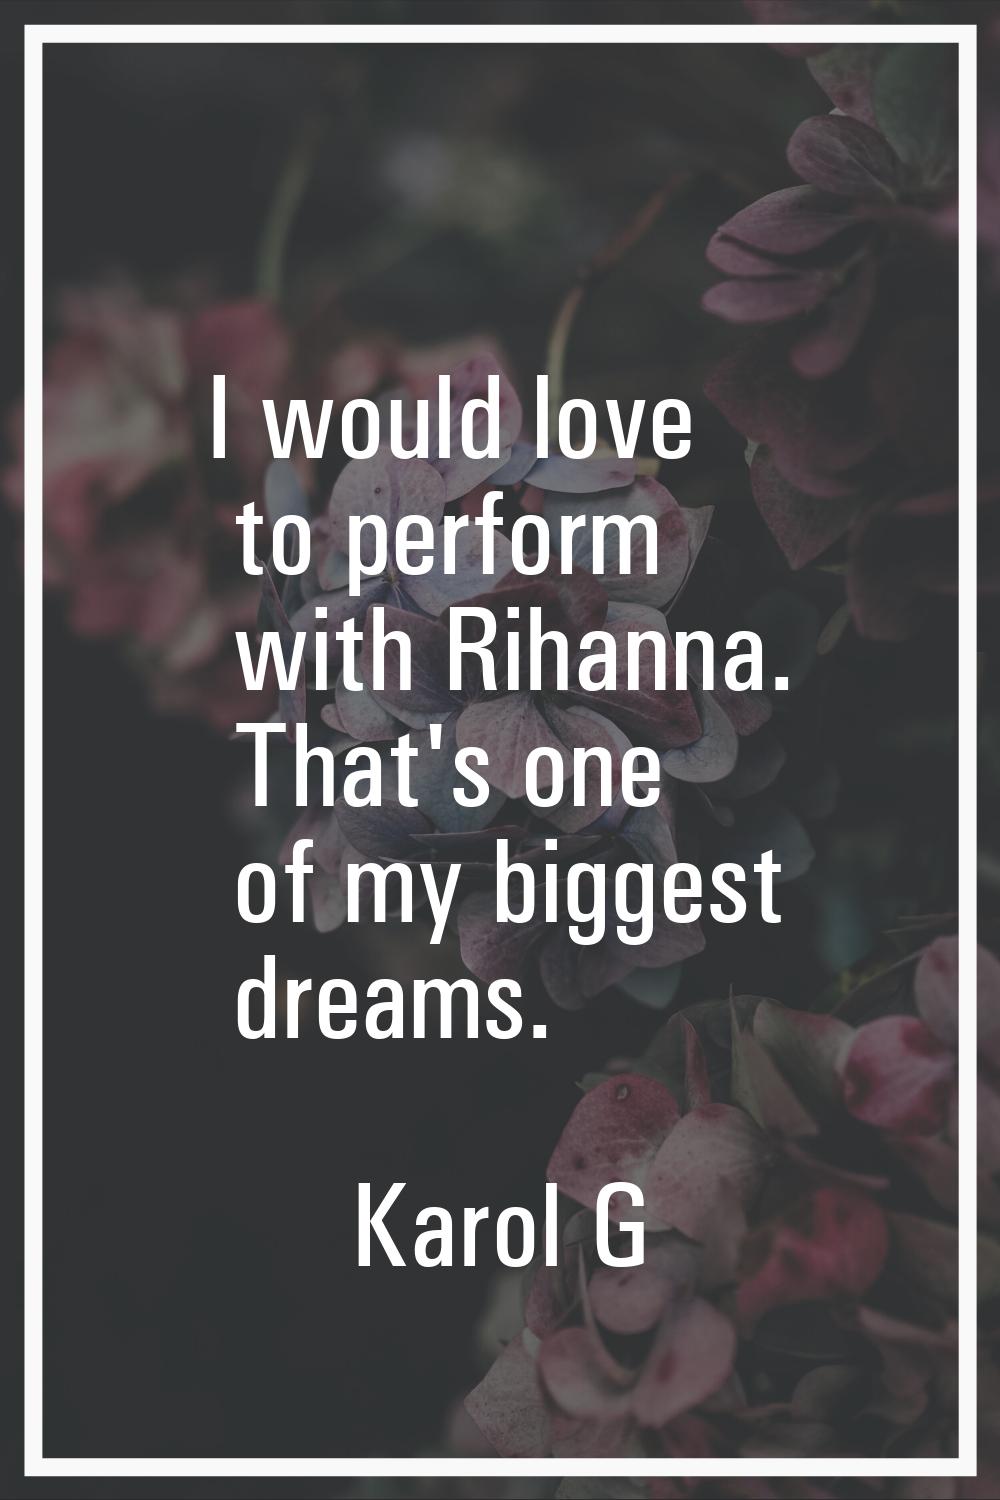 I would love to perform with Rihanna. That's one of my biggest dreams.